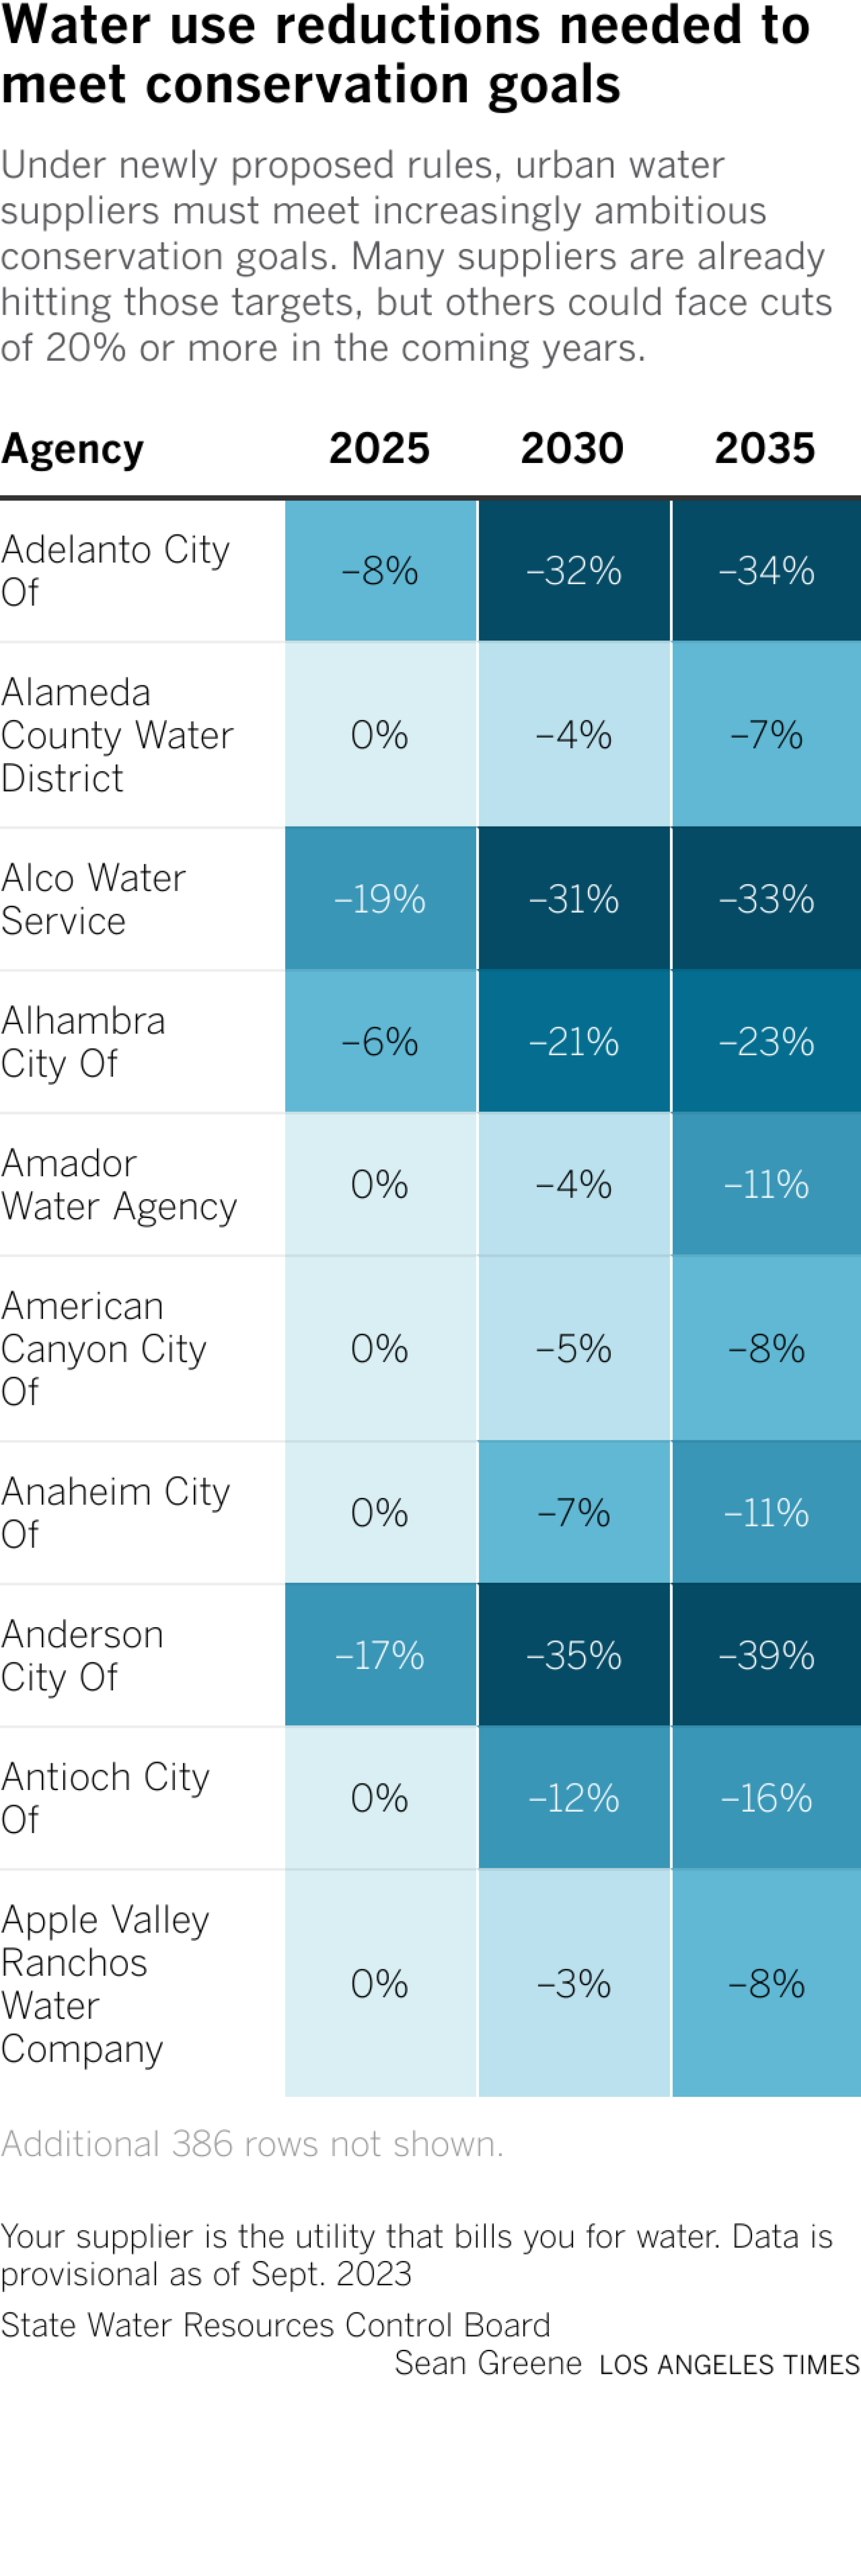 Table contains a list of about 400 urban water suppliers and their water use reductions.